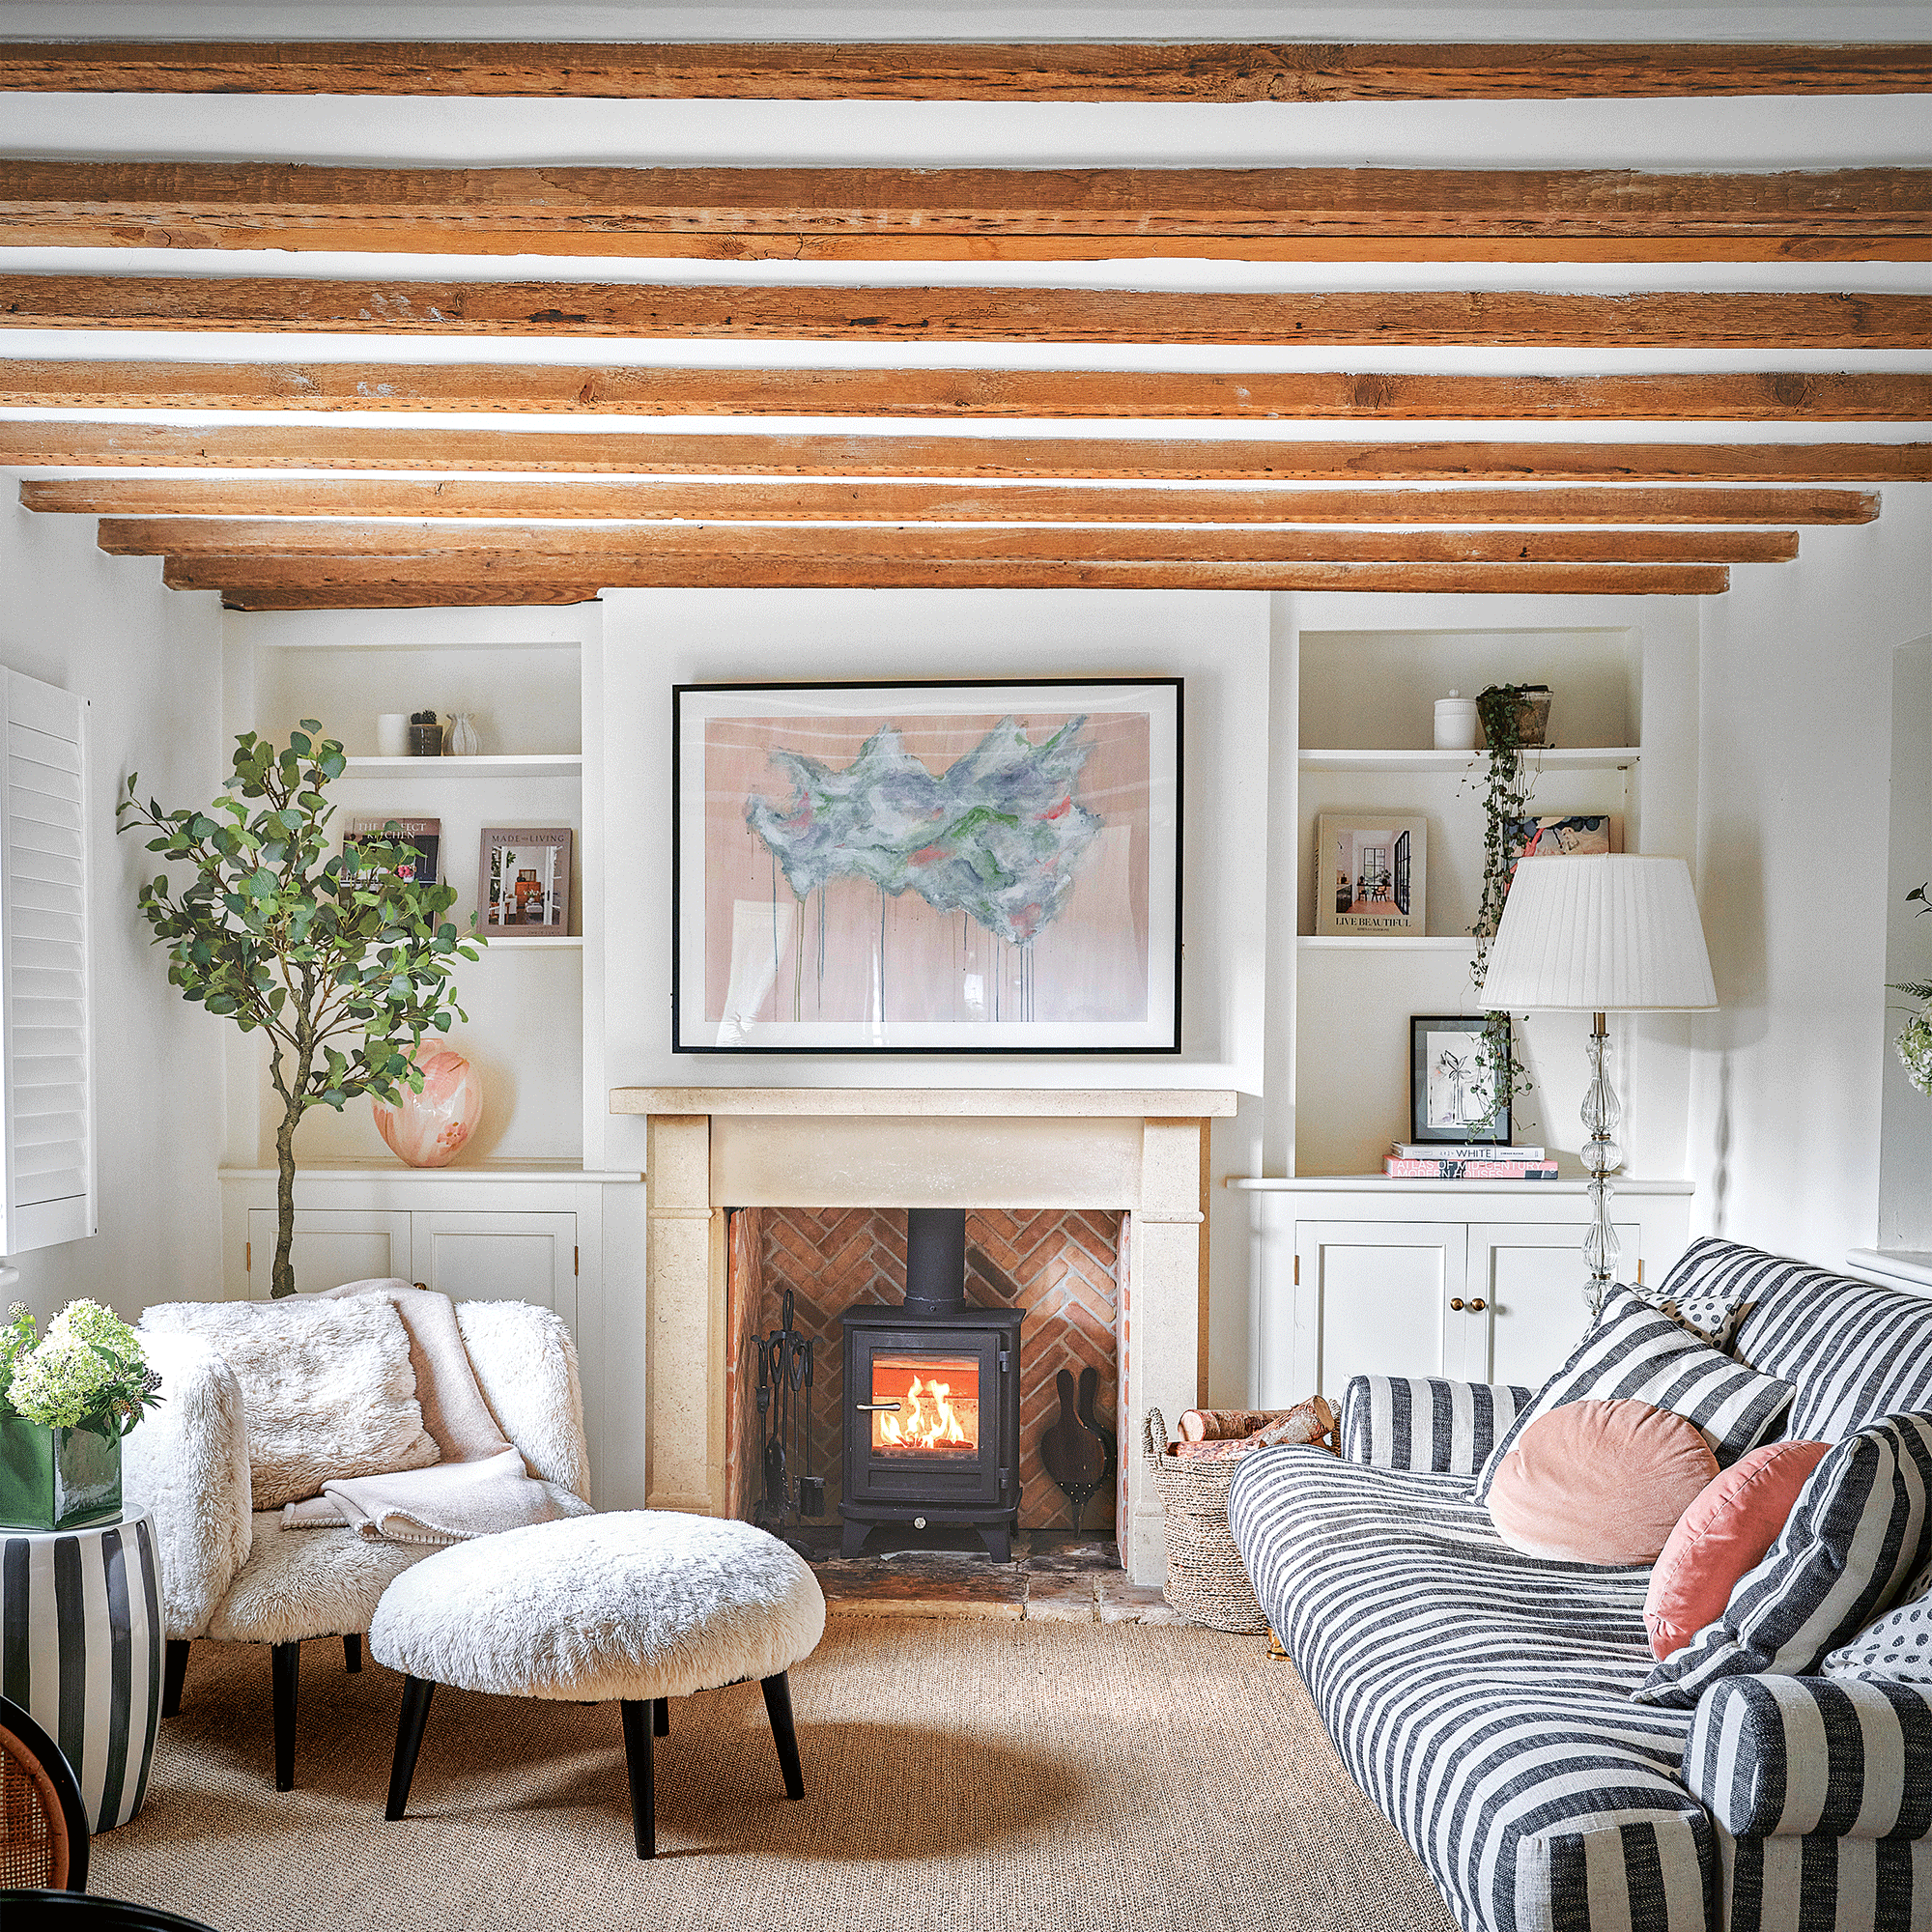 Wooden beam ceiling in white period living room